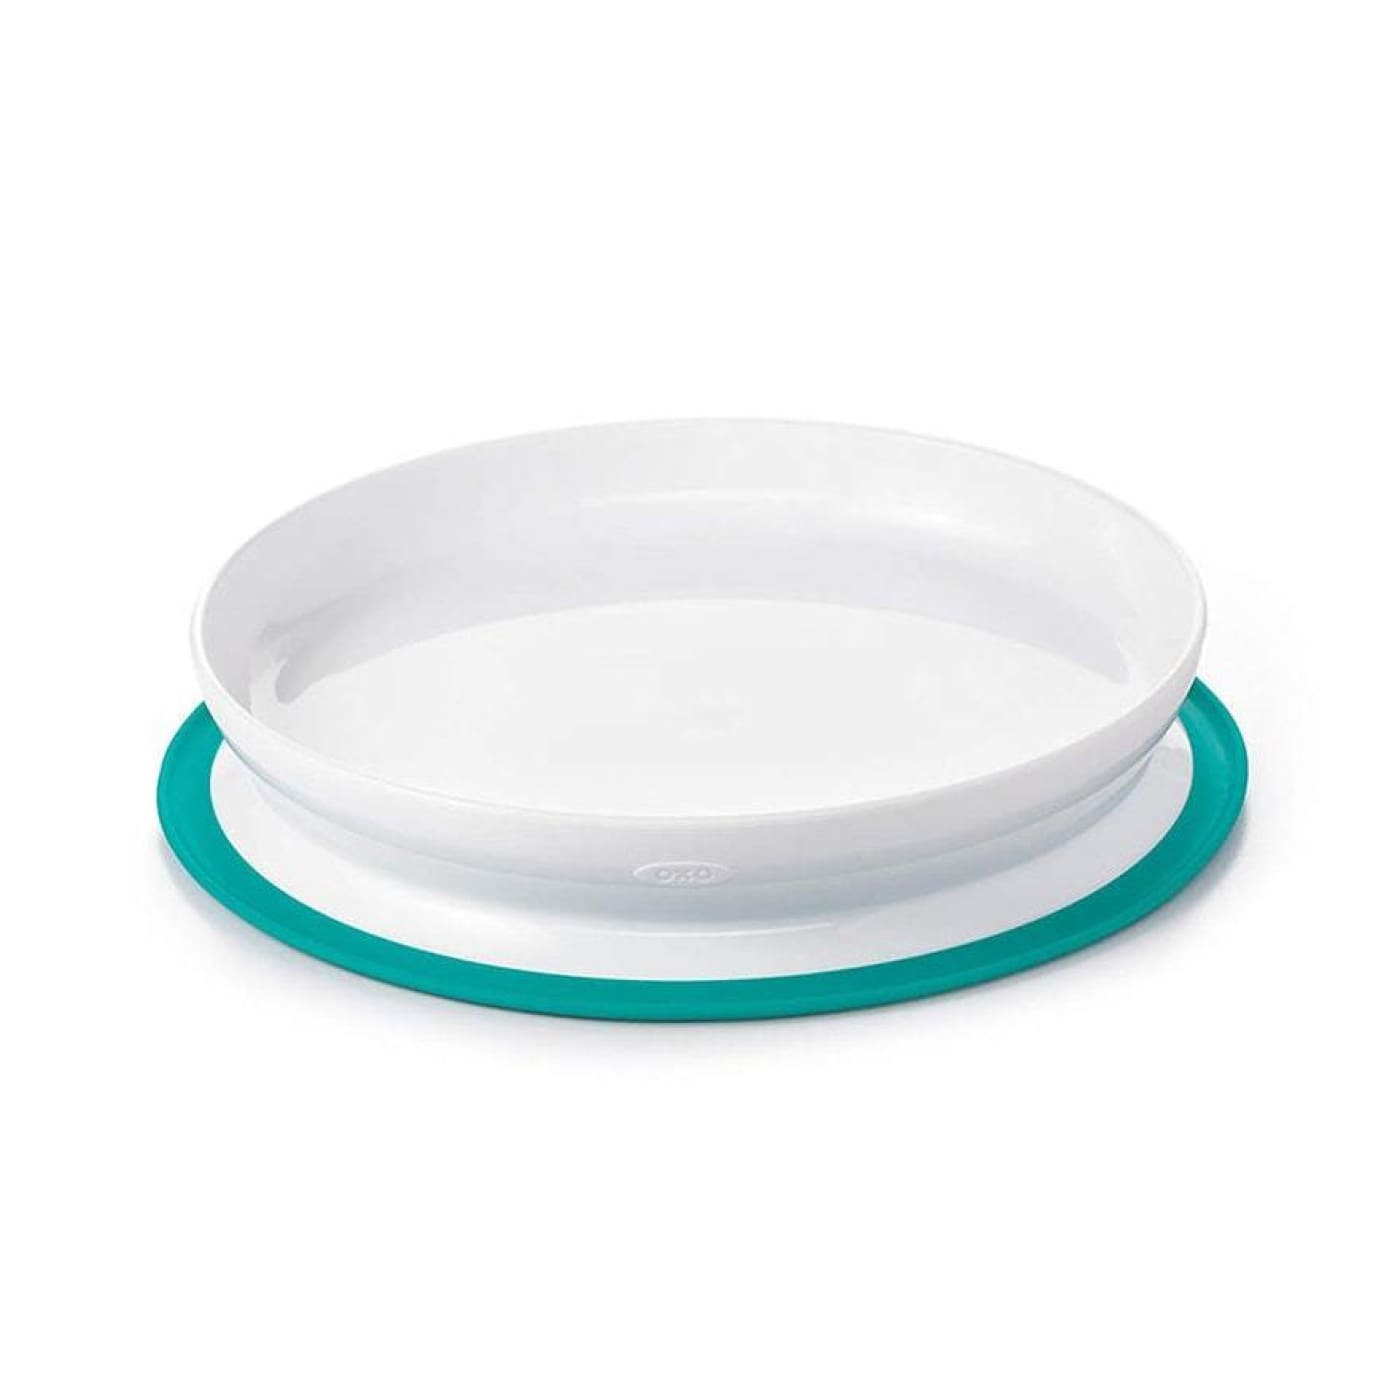 Oxo Tot Stick & Stay Suction Plate - Teal - Teal - NURSING & FEEDING - CUTLERY/PLATES/BOWLS/TOYS